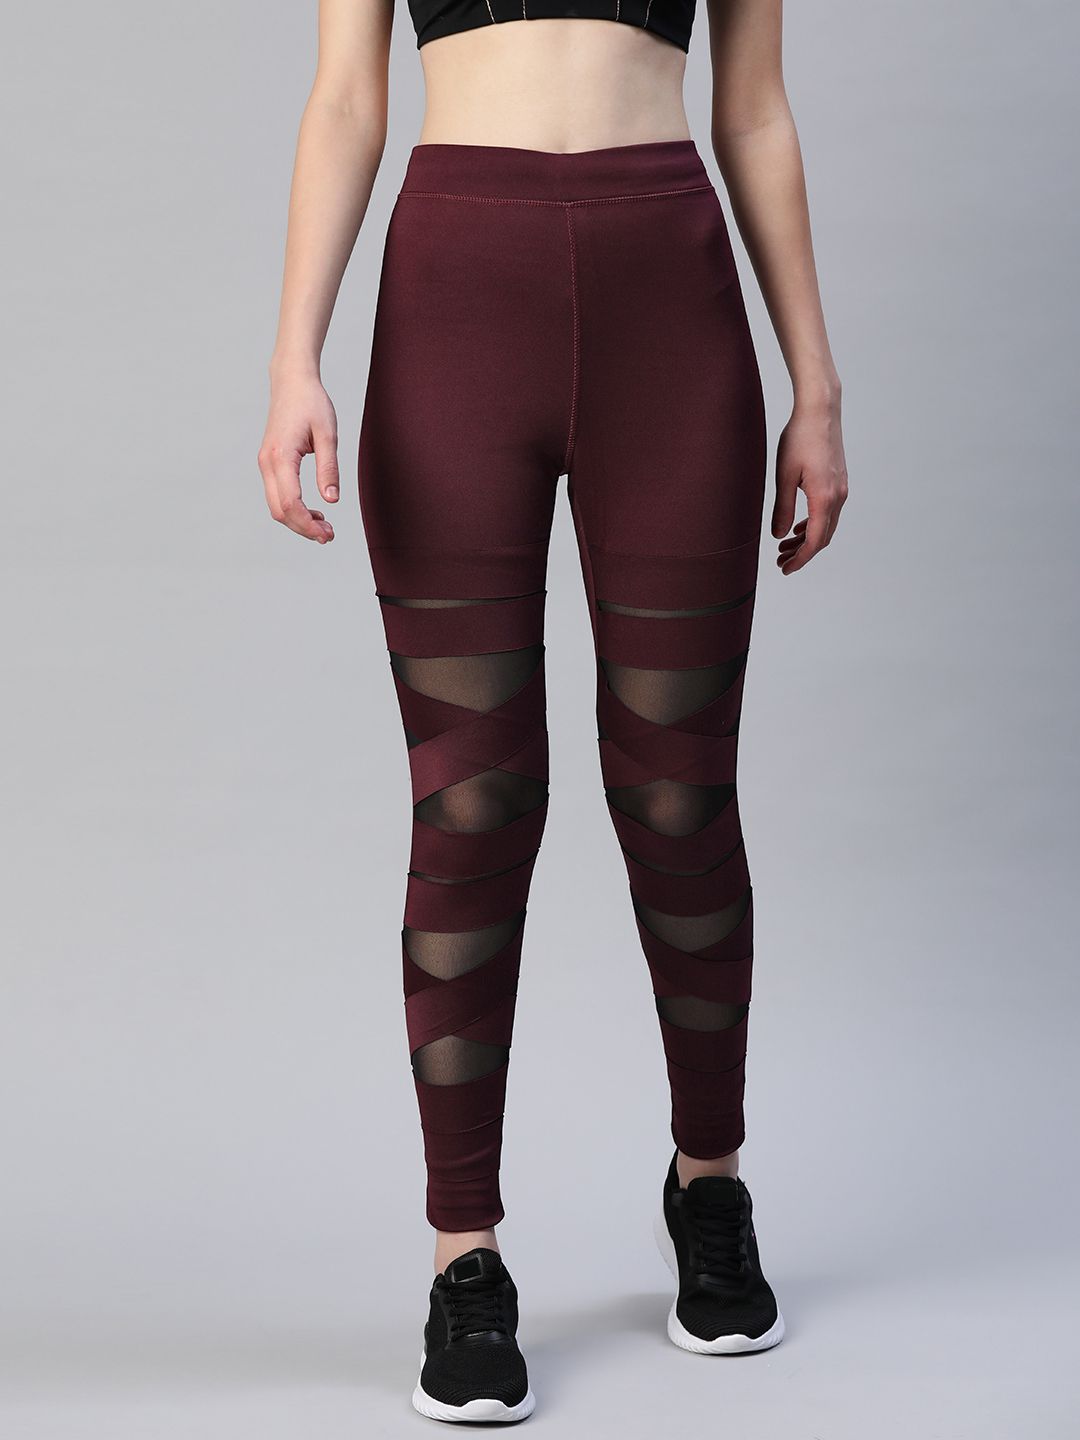 Blinkin Women Maroon Rapid Dry Tights With Breathable Mesh Panels Price in India